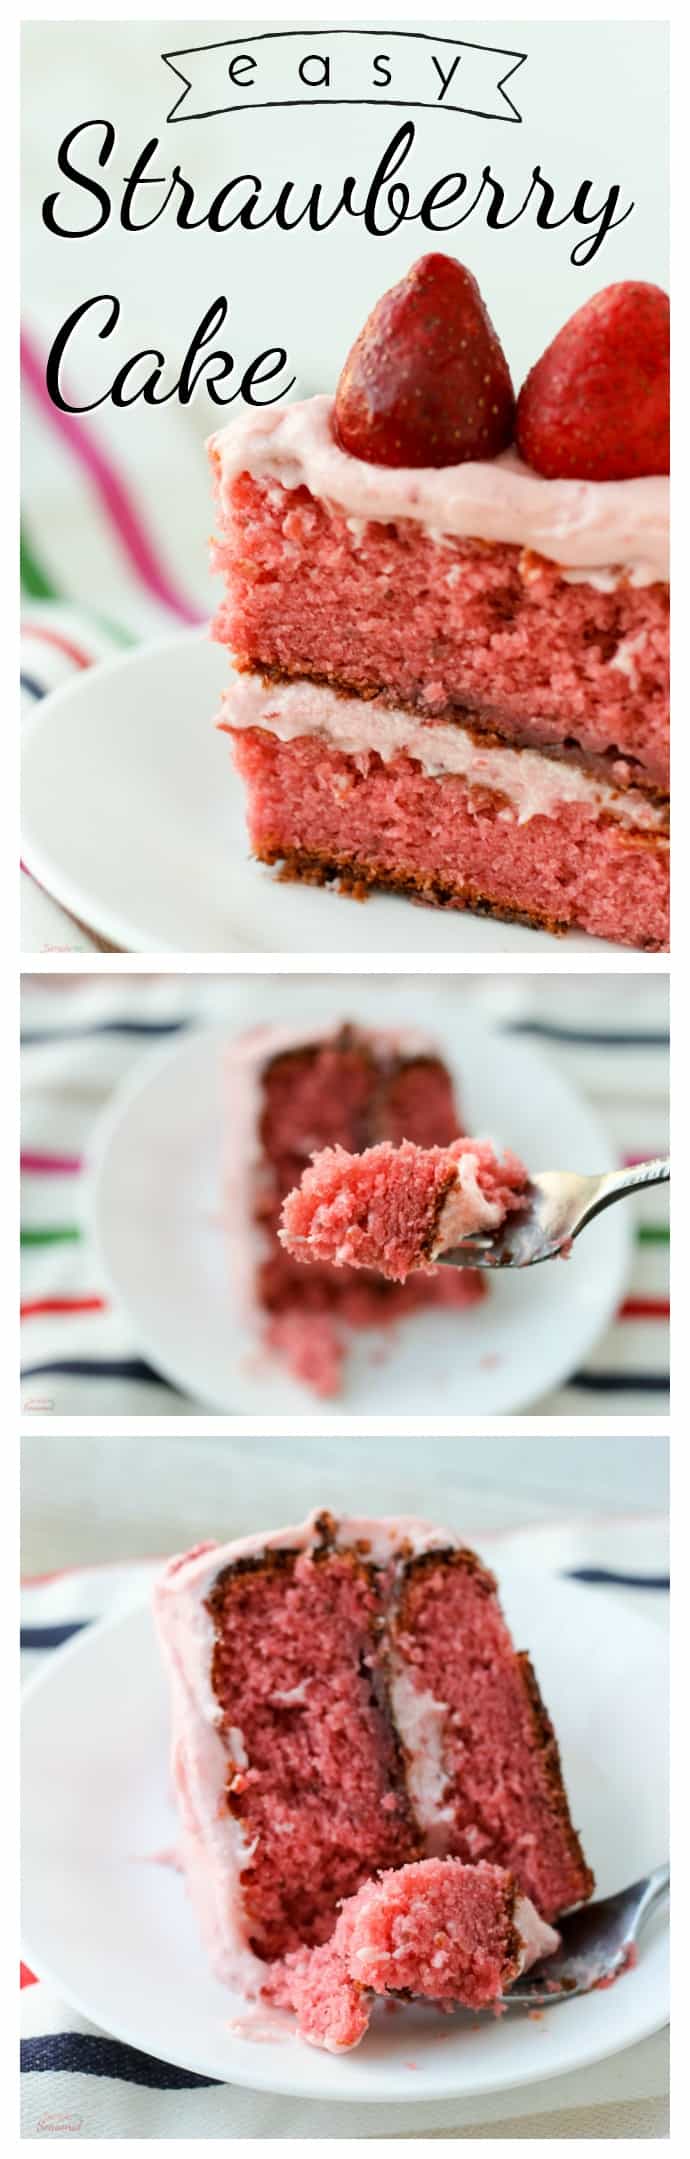 With real strawberries in the cake and the frosting, this Easy Strawberry Cake is perfect for Valentine's Day, Easter or any special celebration! The homemade frosting is good enough to eat with a spoon (and it tastes like a strawberry milkshake.) #Cake #ValentinesDay #Easter #BabyShower #Dessert #StrawberryCake  via @nmburk